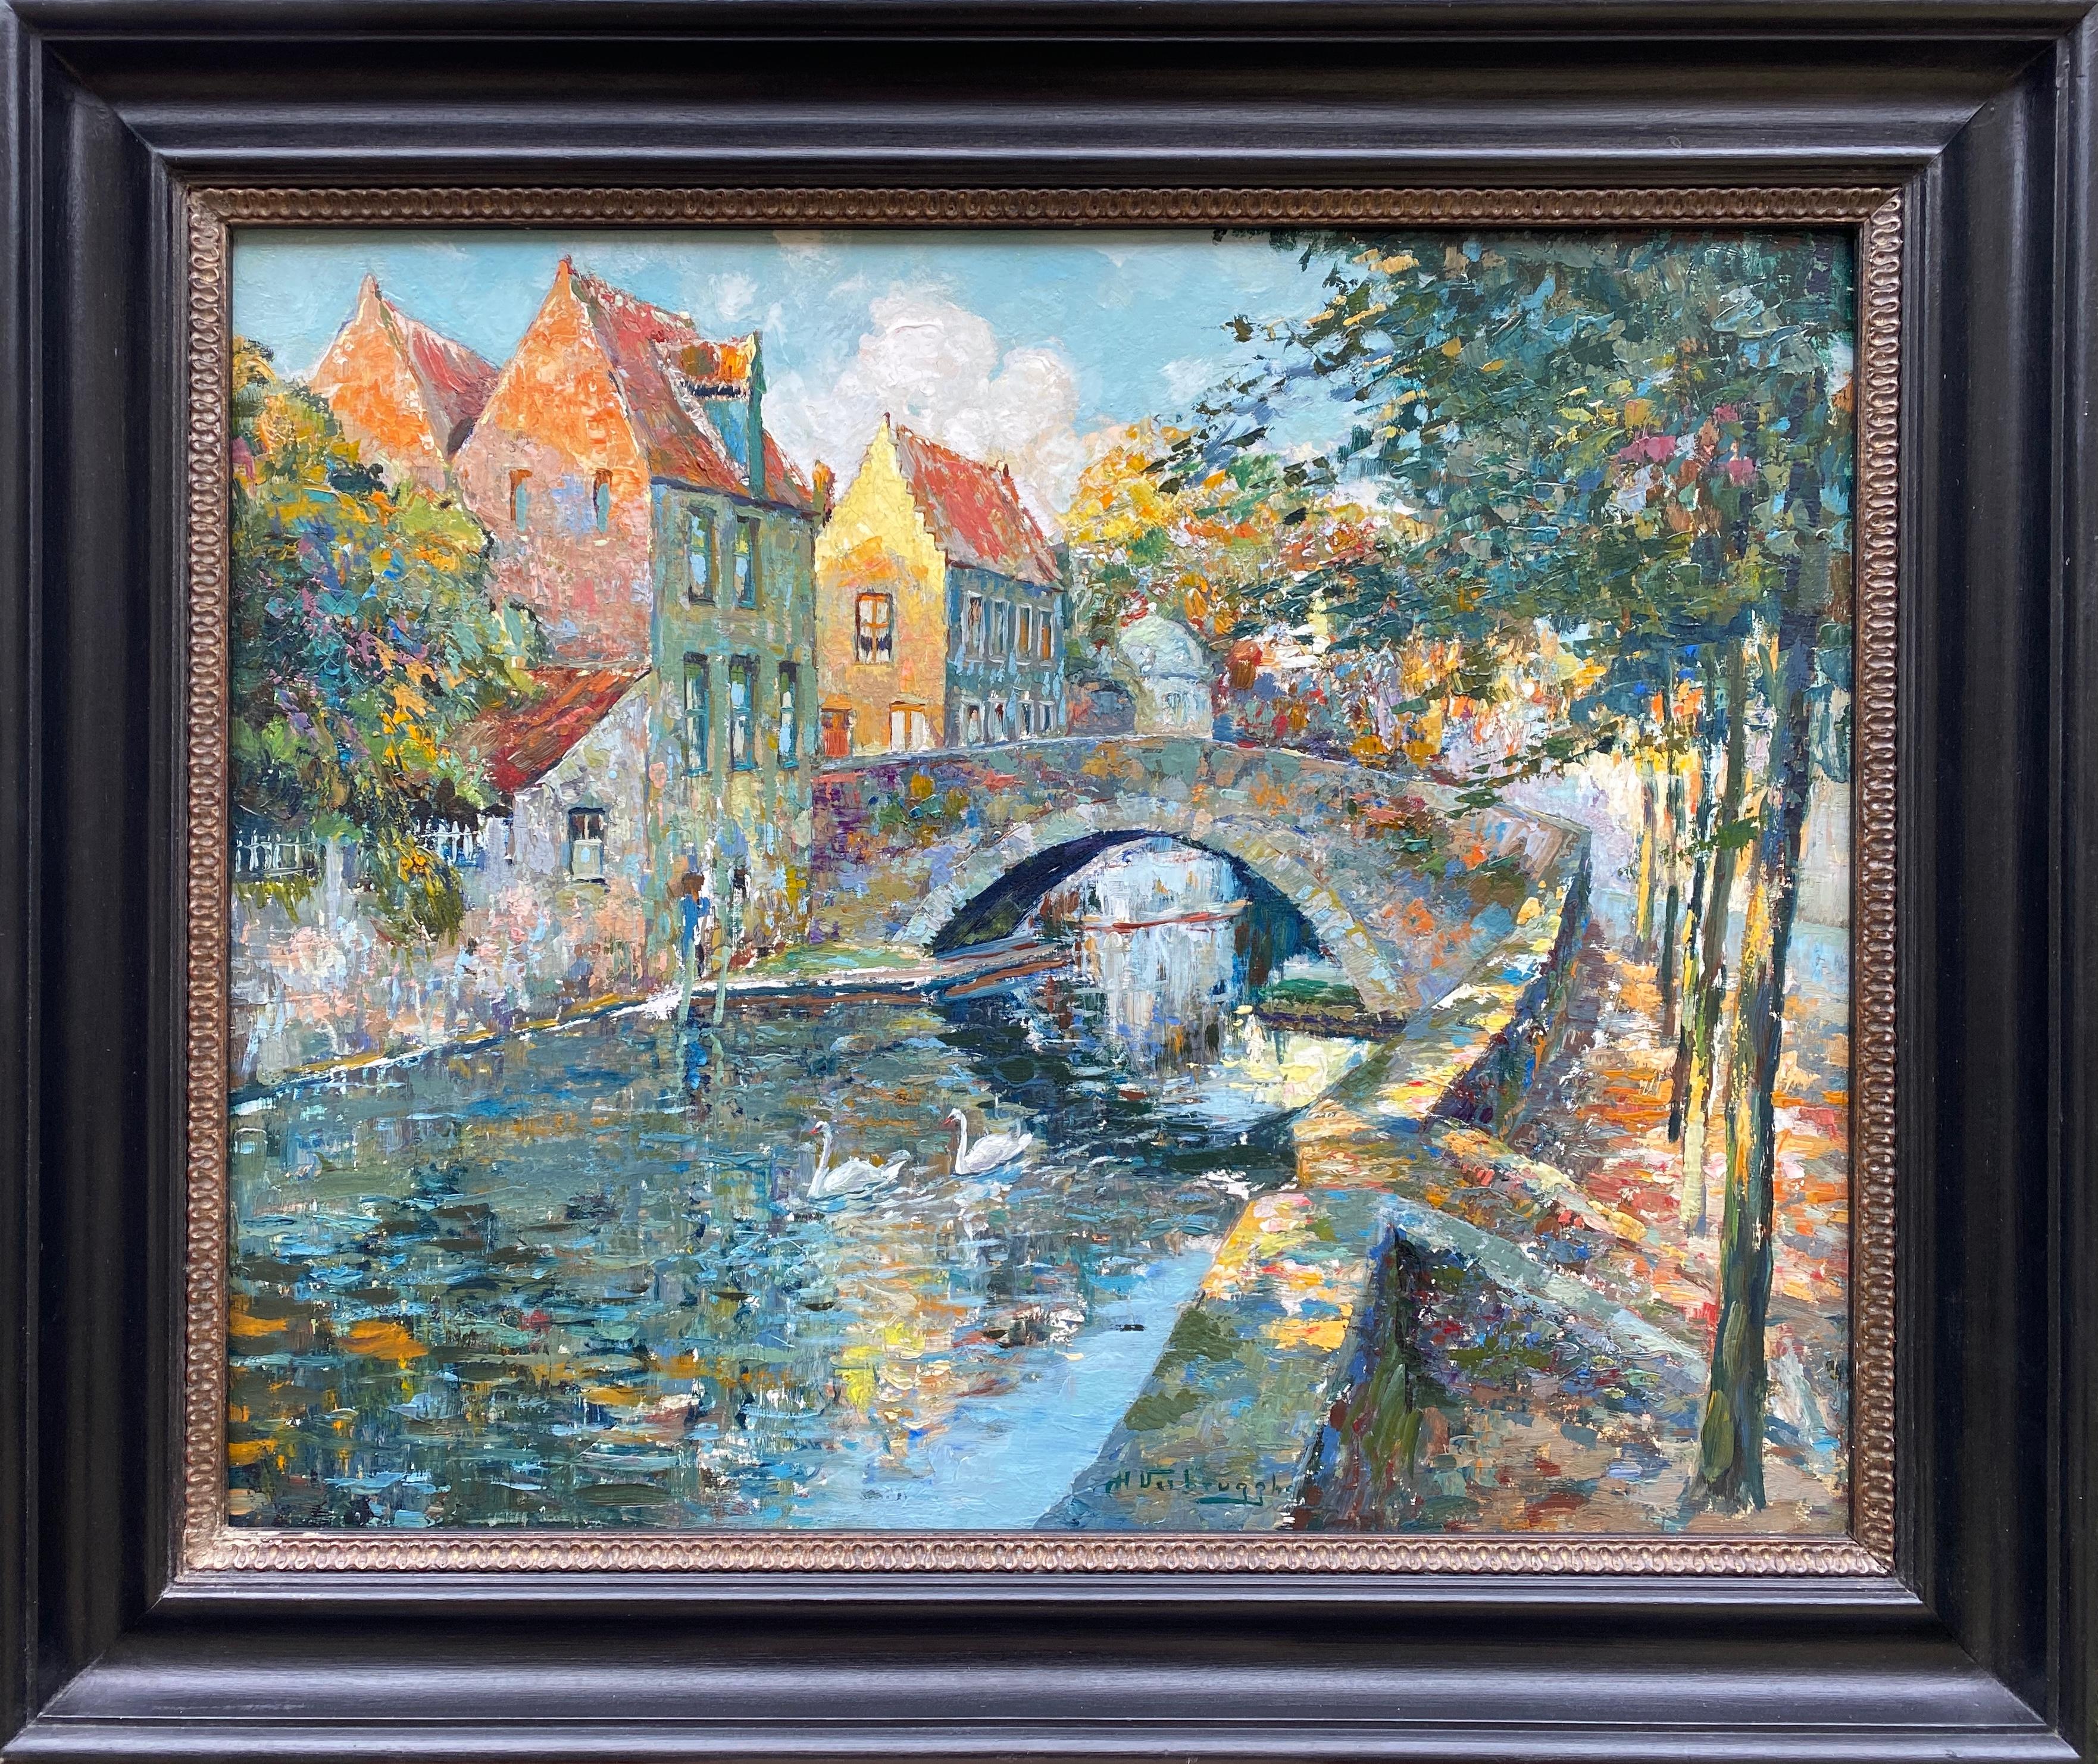 Swans of Bruges – Groenerei
Verbrugghe Charles

Bruges 1877 – 1974 Paris
Belgian Painter

Signature: Signed middle right
Medium: Oil on panel
Dimensions: Image size 51 x 63 cm, frame size 65 x 77 cm

Biography: Verbrugghe Charles was born into